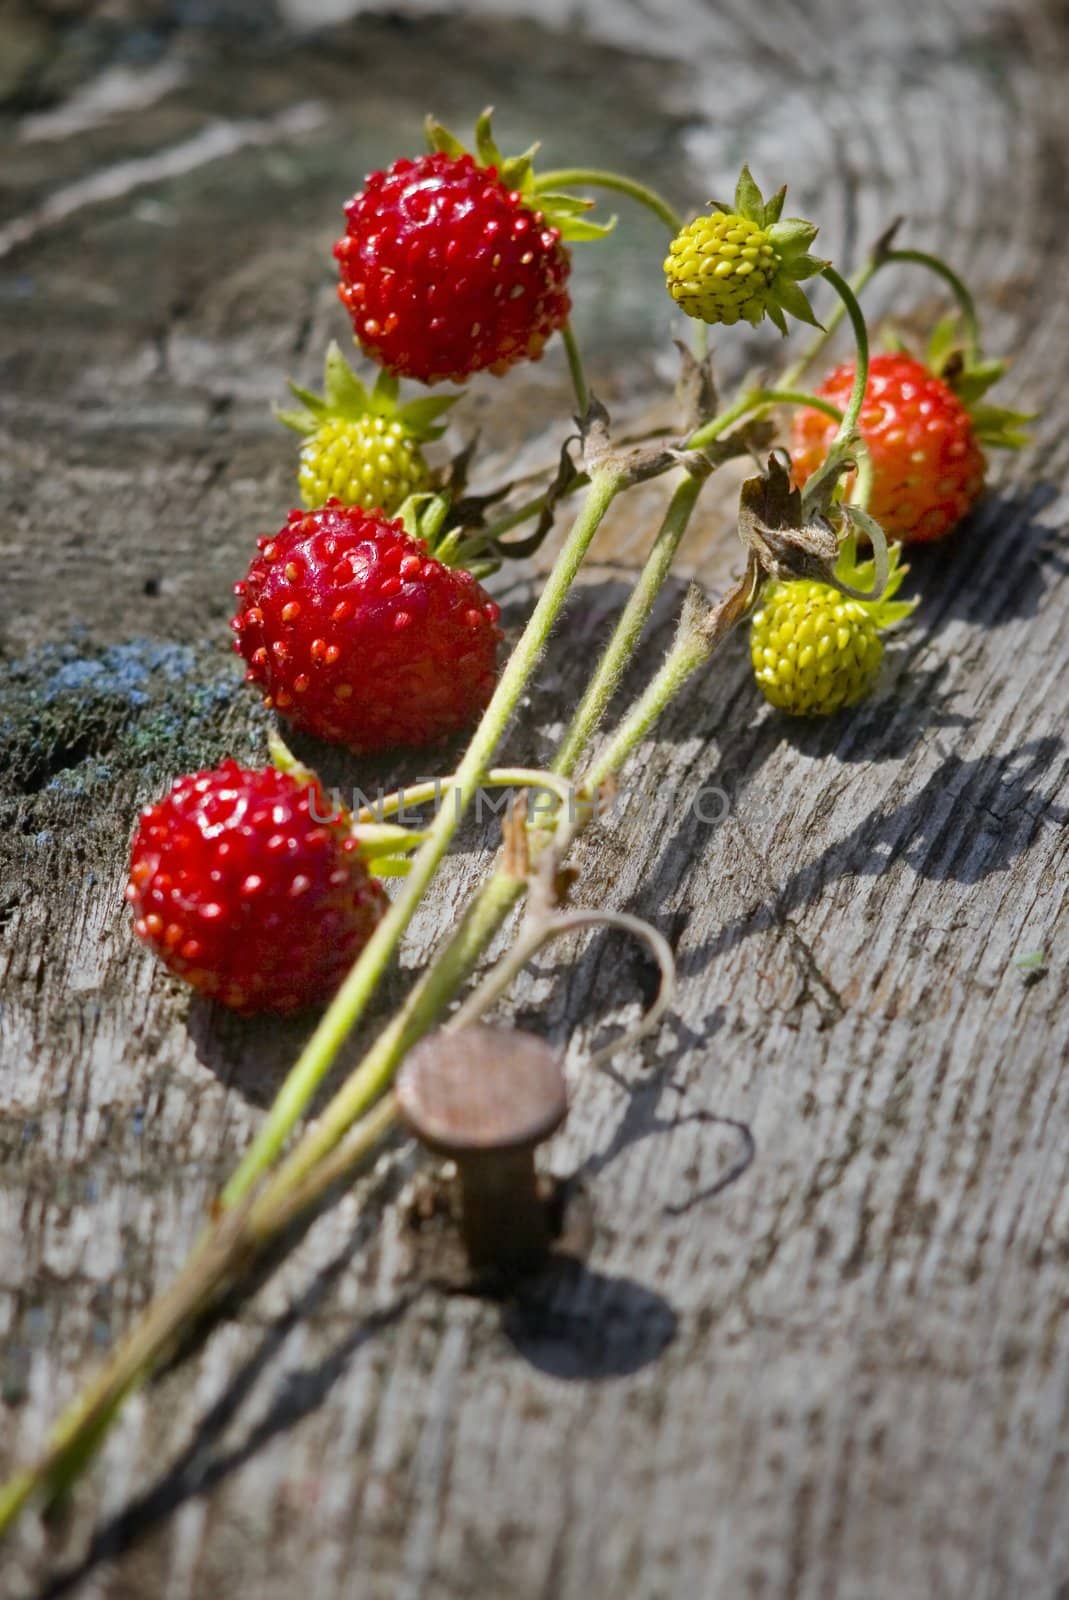 Red and green strawberry on old desk. Summer time.